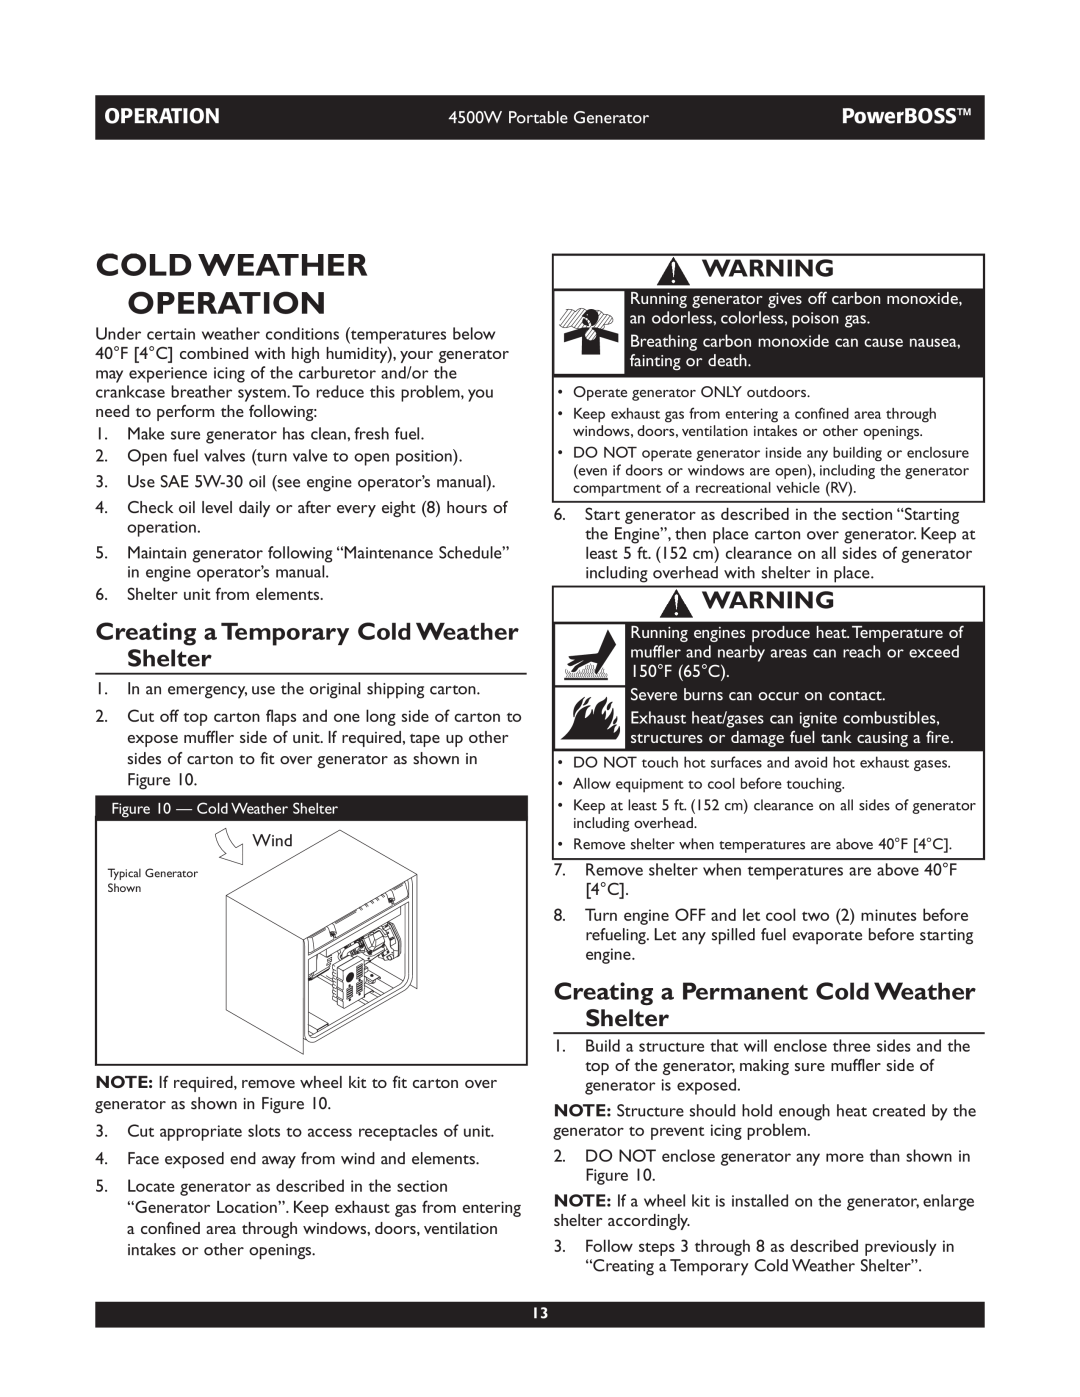 Briggs & Stratton 01648-1 Cold Weather Operation, Creating a Temporary Cold Weather Shelter, PowerBOSS 